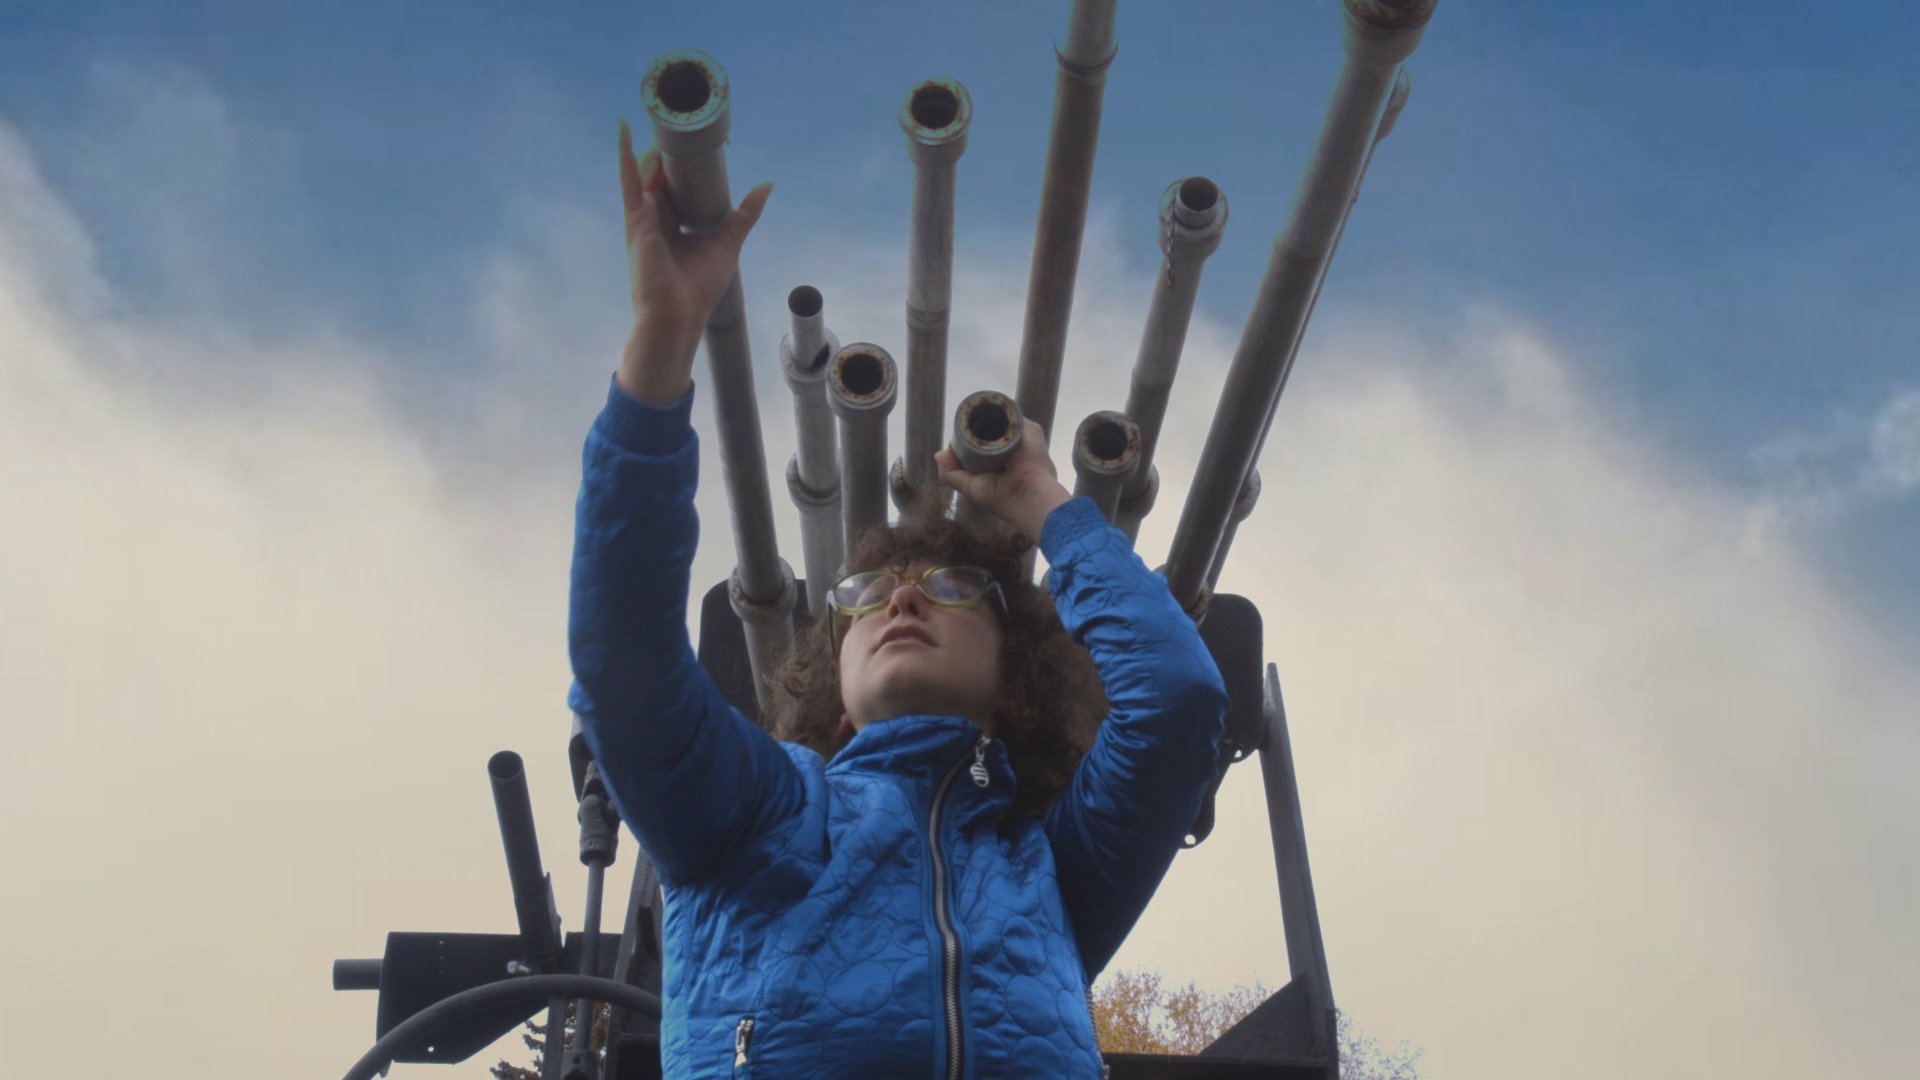 a person wearing a blue jacket stands under a set of metal pipes and holds two in their hands and looks out into the sky